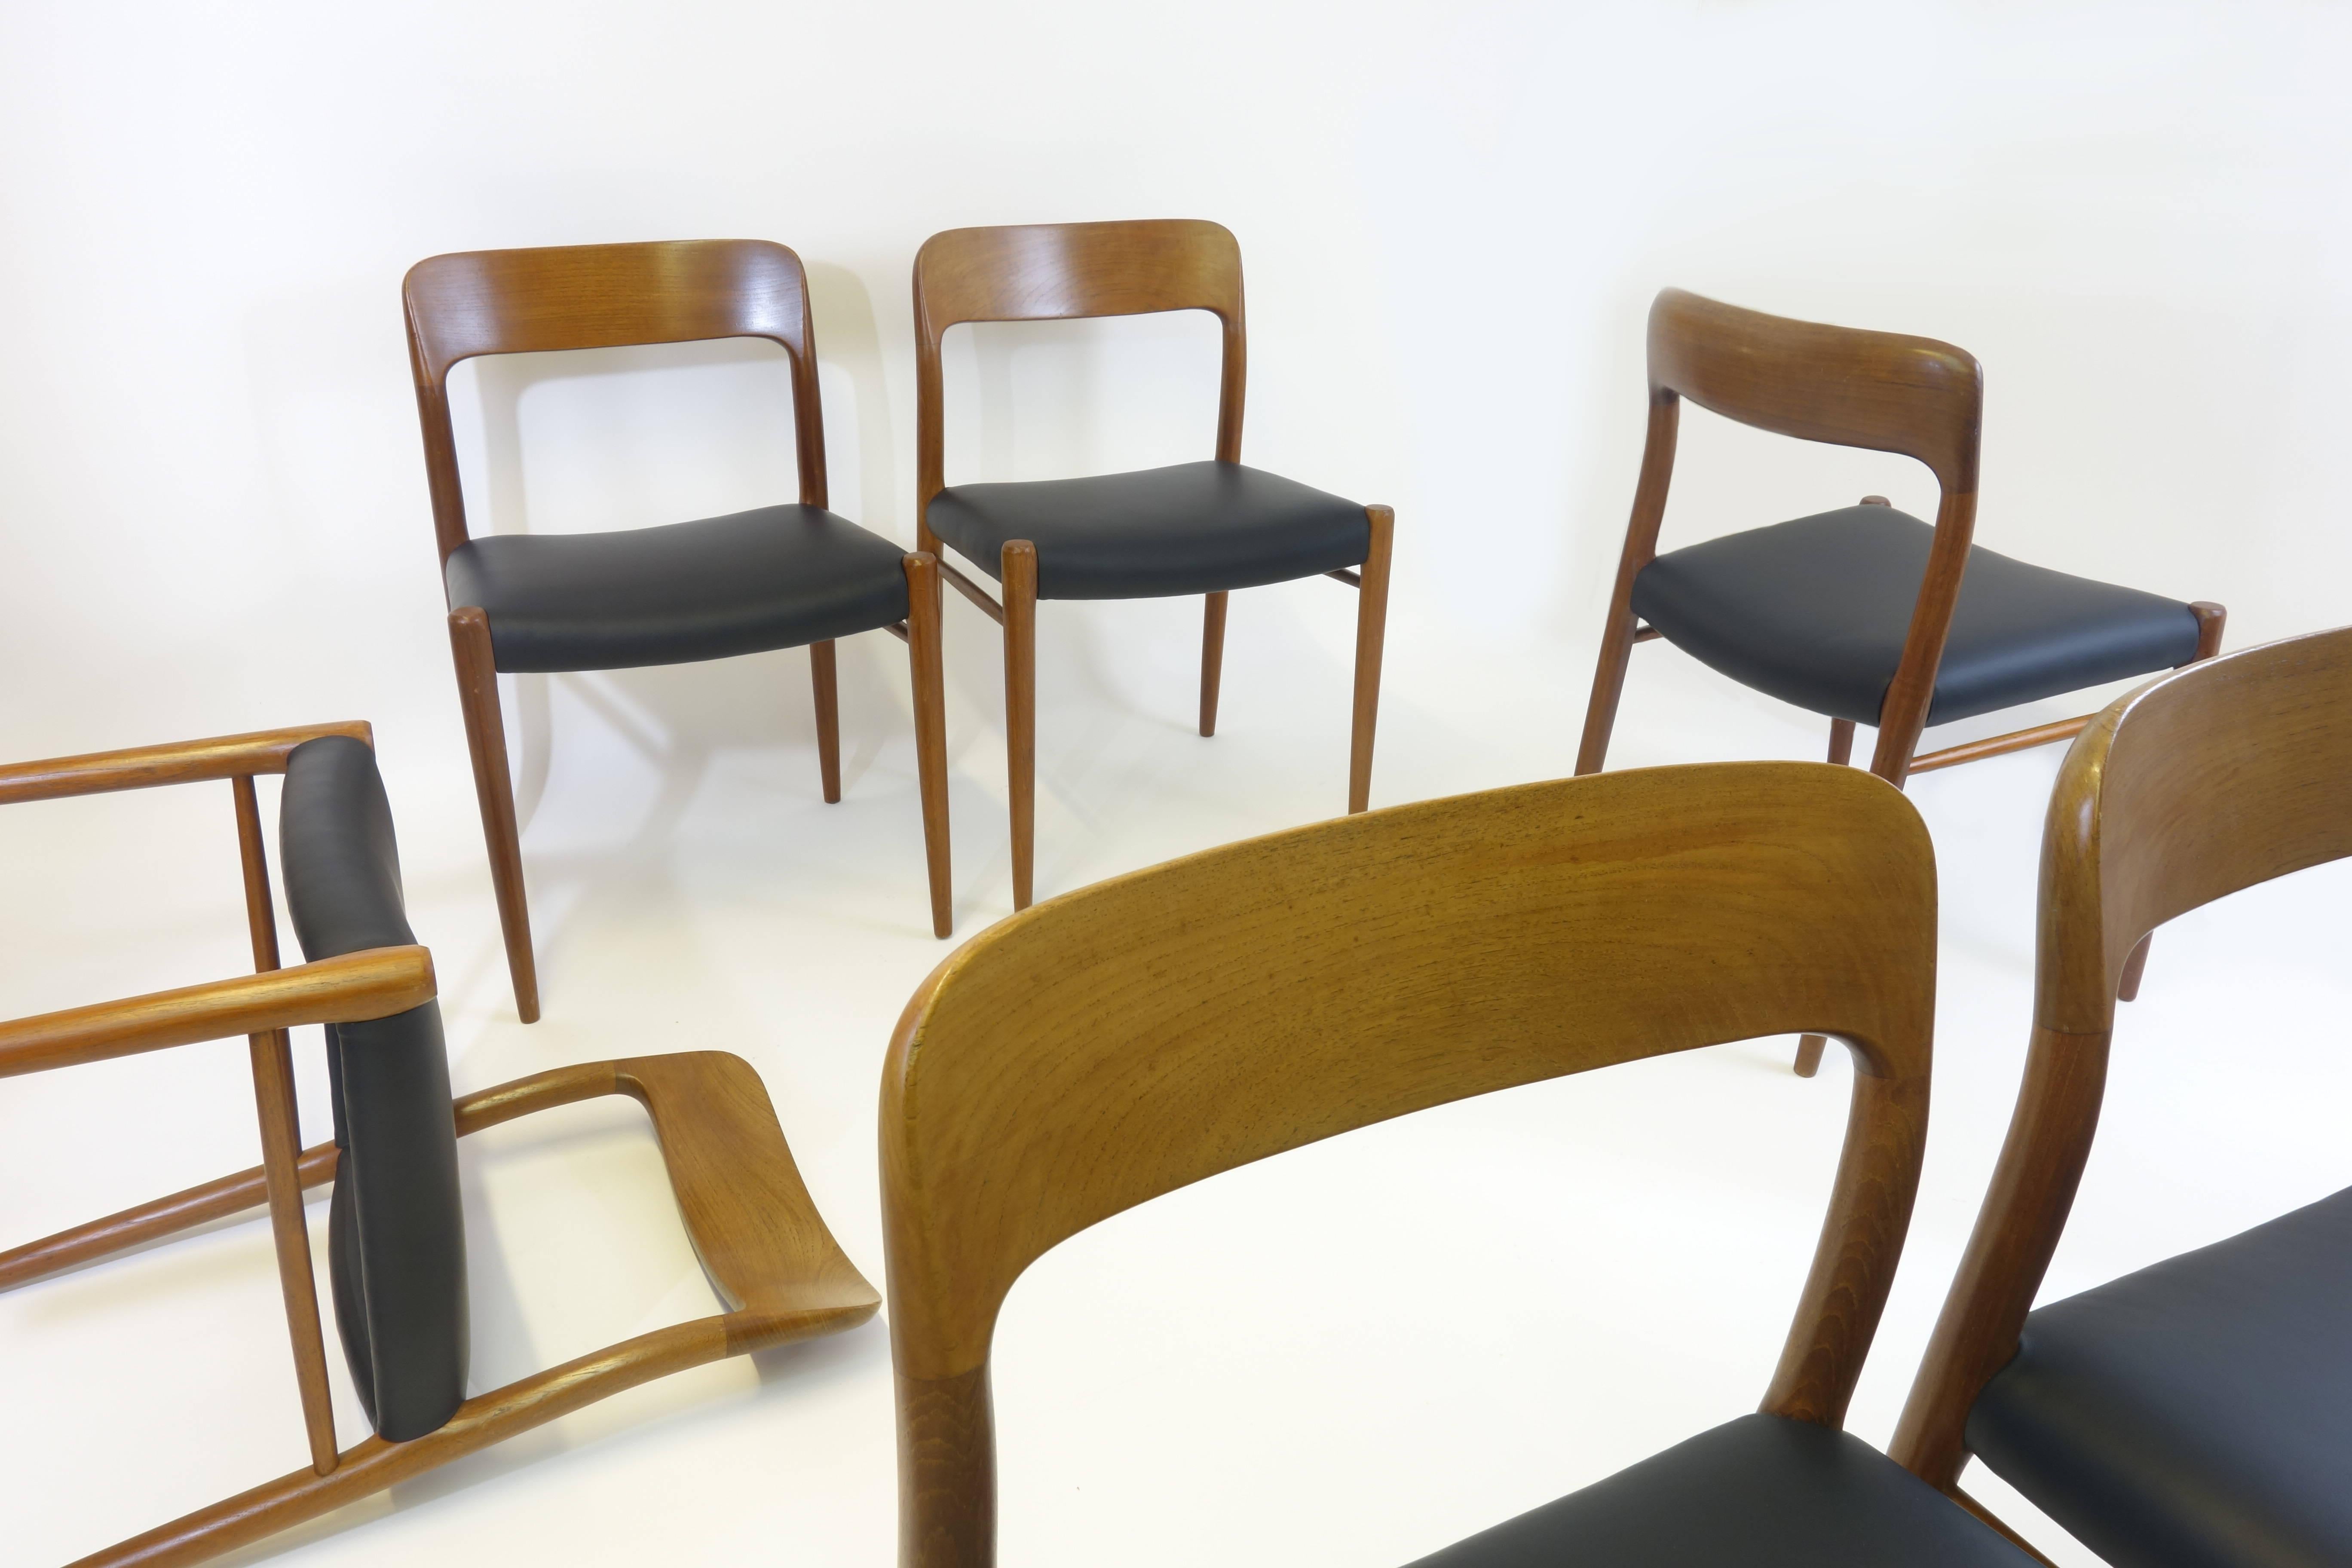 Mid-Century Modern 6 Dining Chairs Model 75 by J.L. Moeller, Denmark, circa 1960